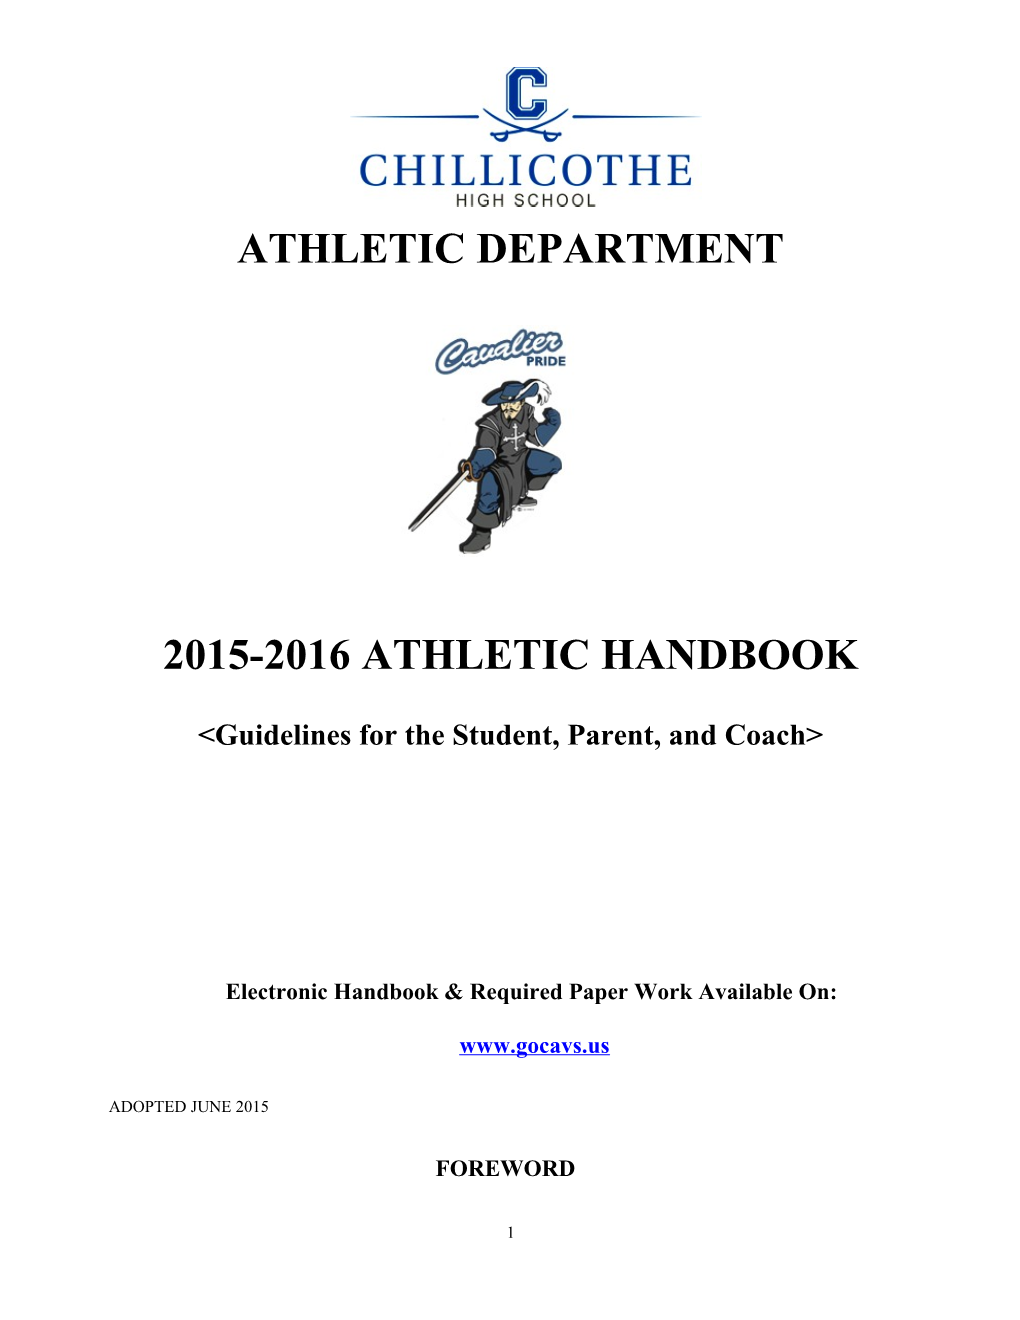 Guidelines for the Student, Parent, and Coach